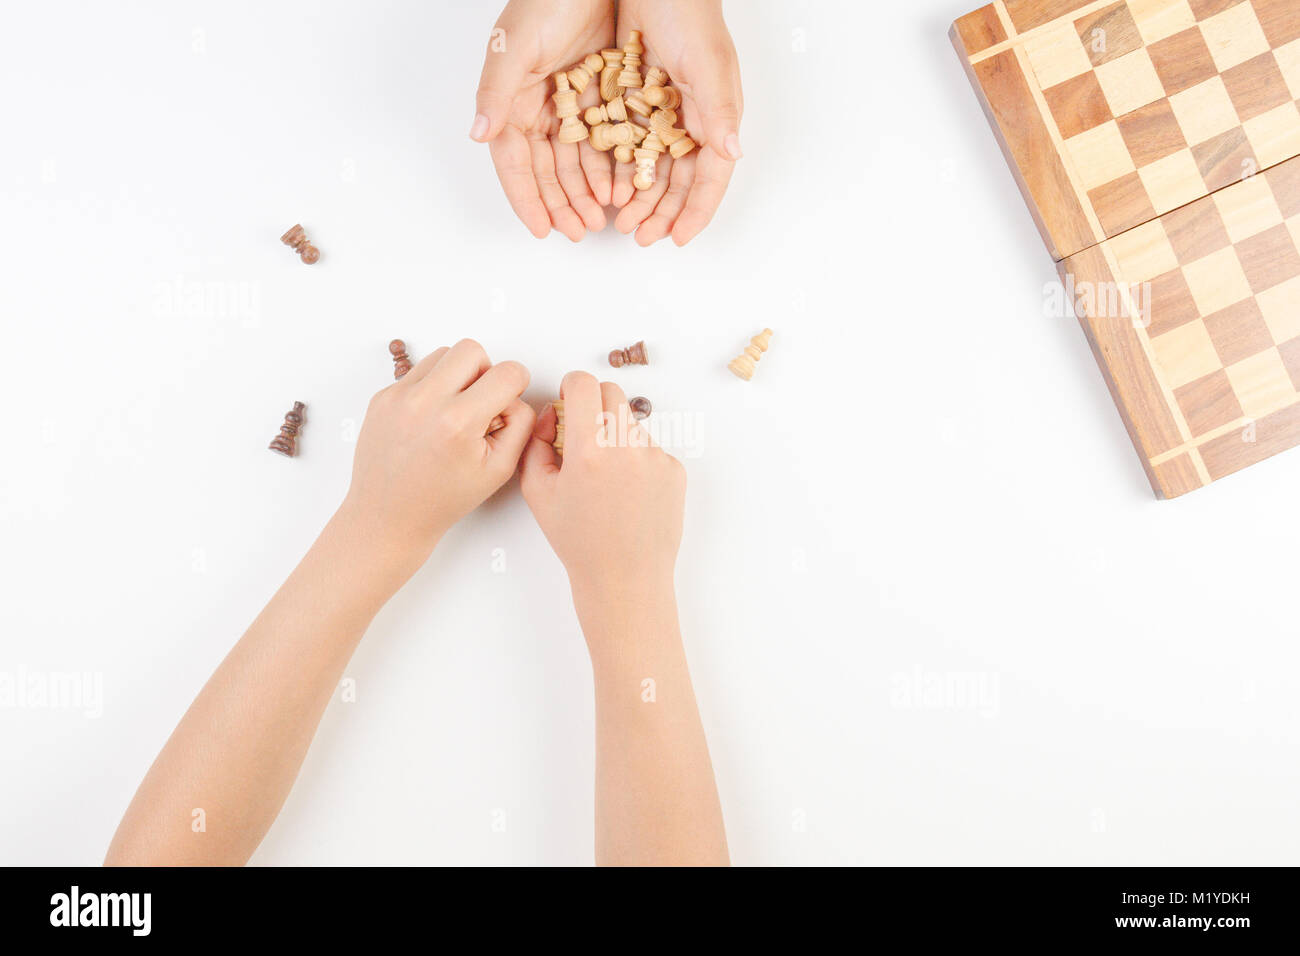 Chess board with chess pieces and a playing kids hand. Stock Photo